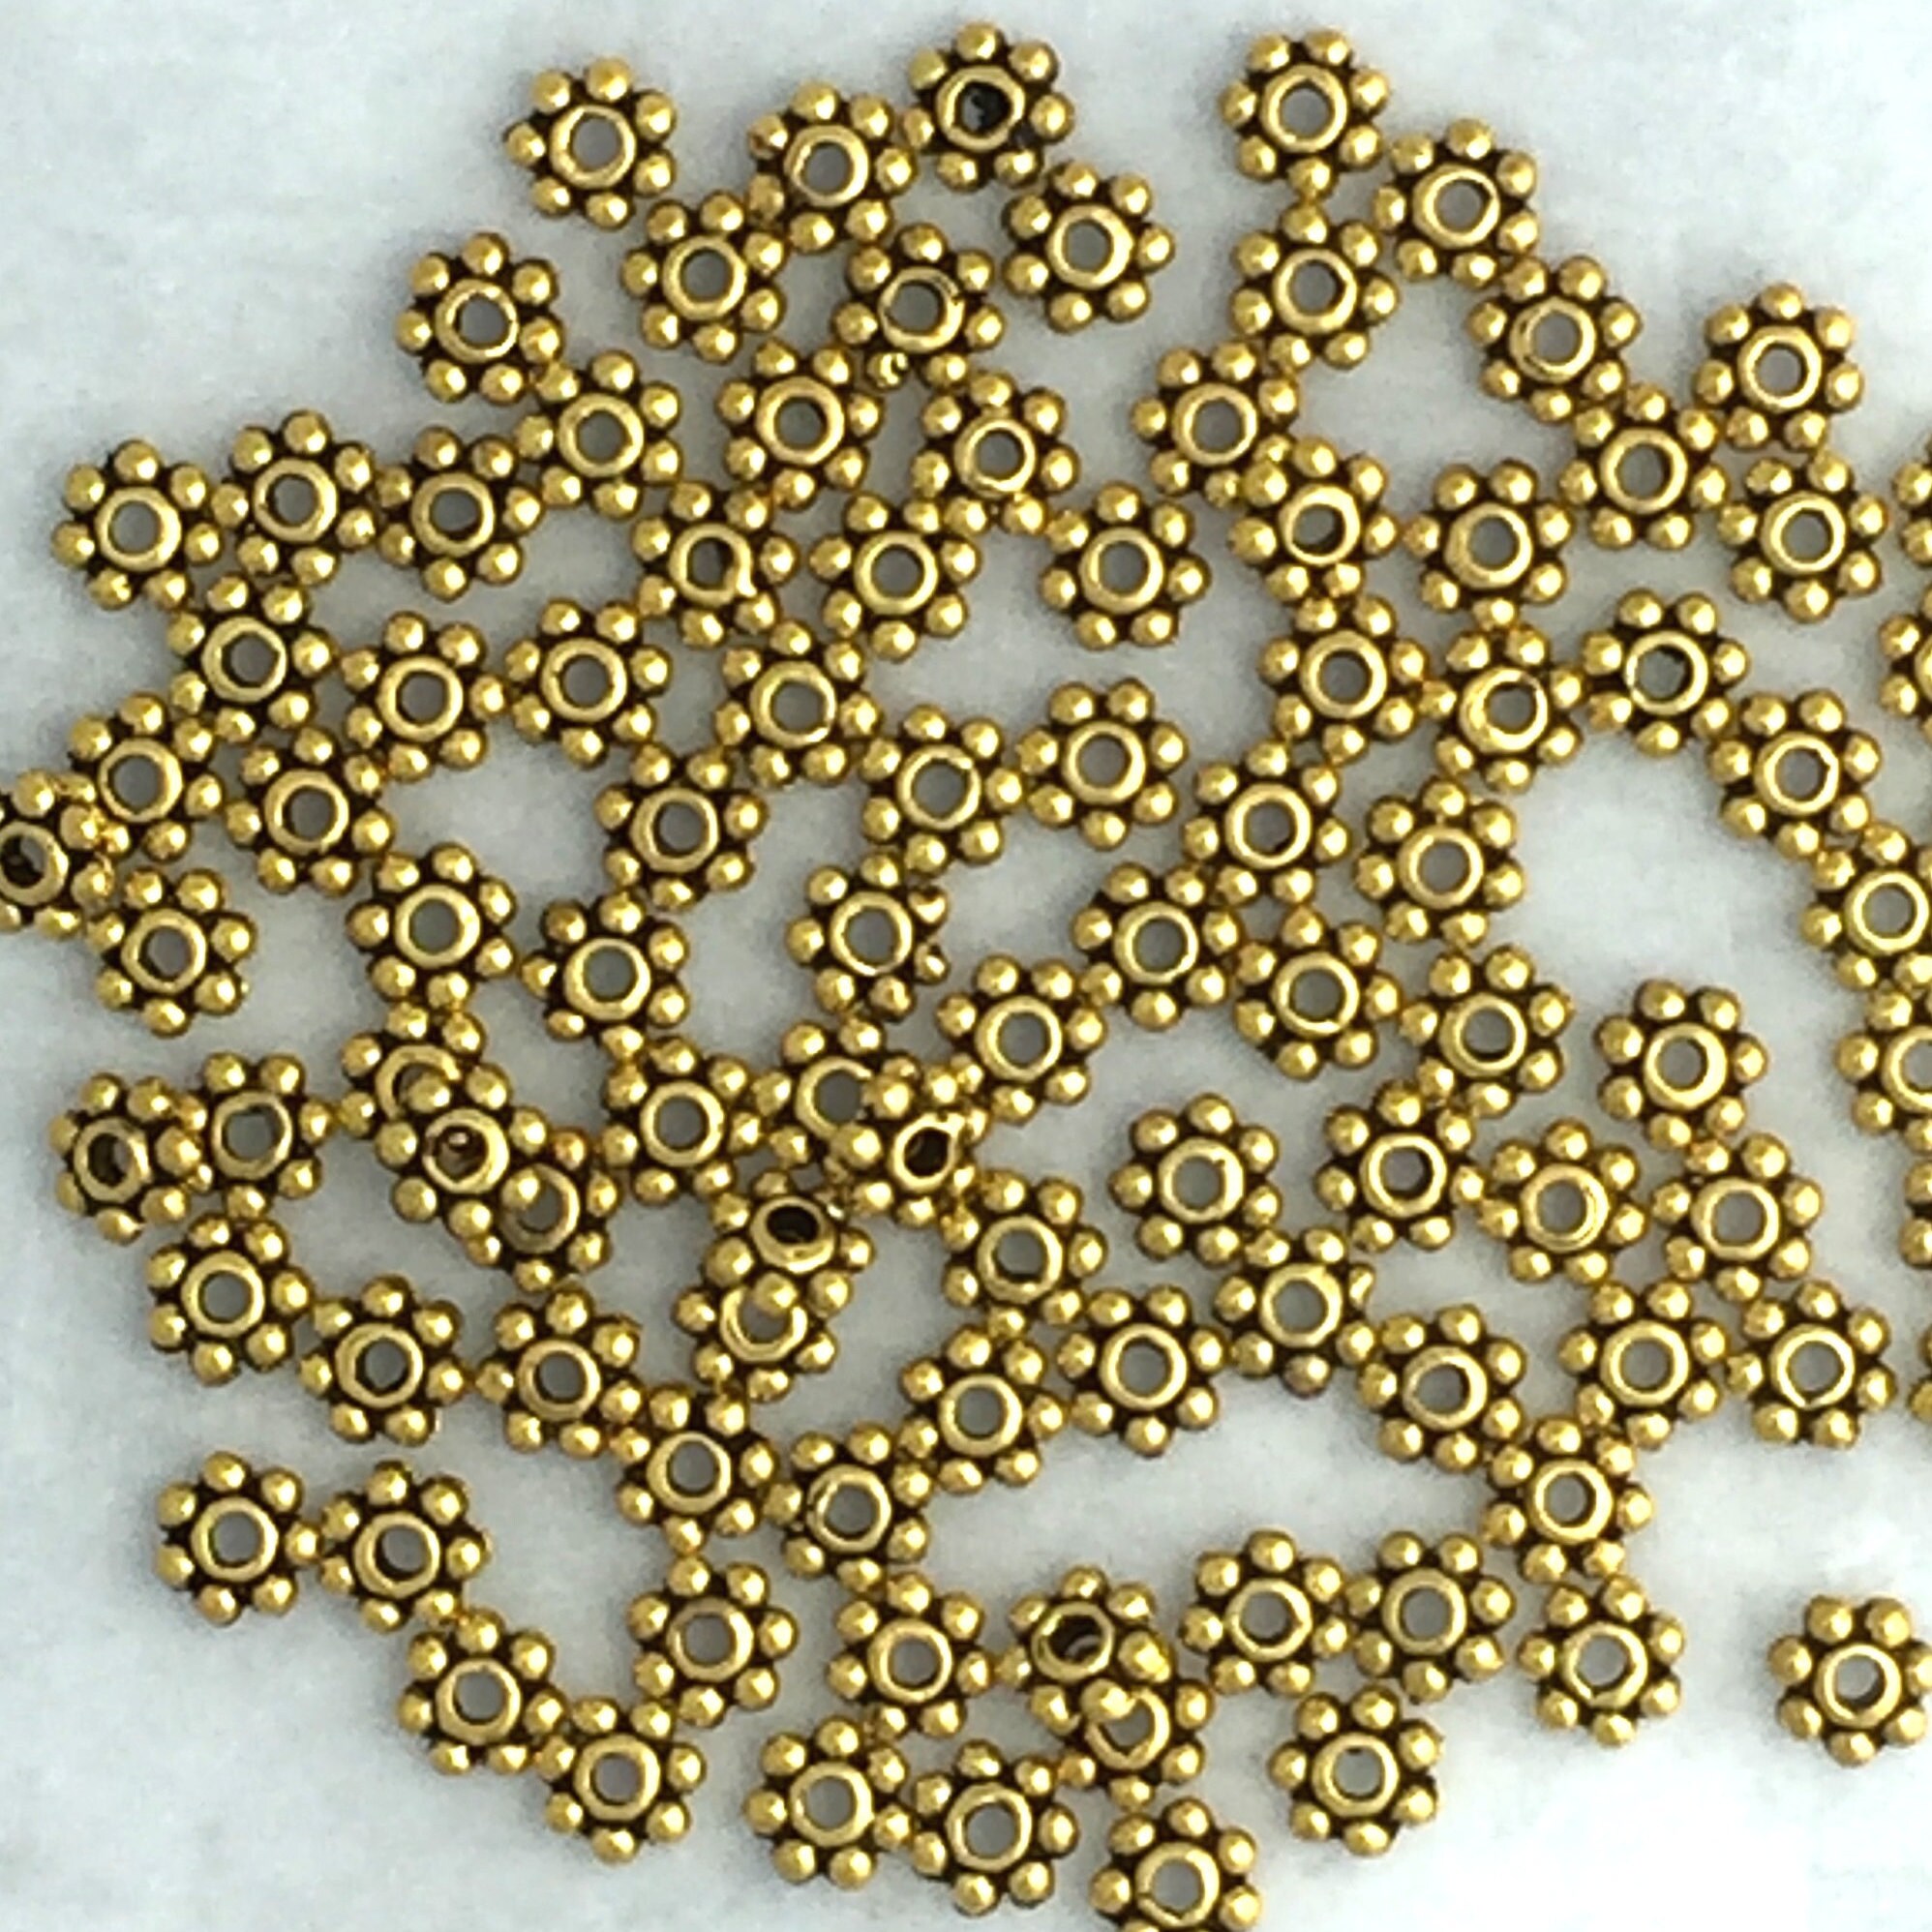  1250 Pieces Gold Spacer Beads for Jewelry Making, Gold Round  Beads and Gold Flat Clay Beads for Bracelets Making, Small Gold Filled  Beads for Jewelry Making